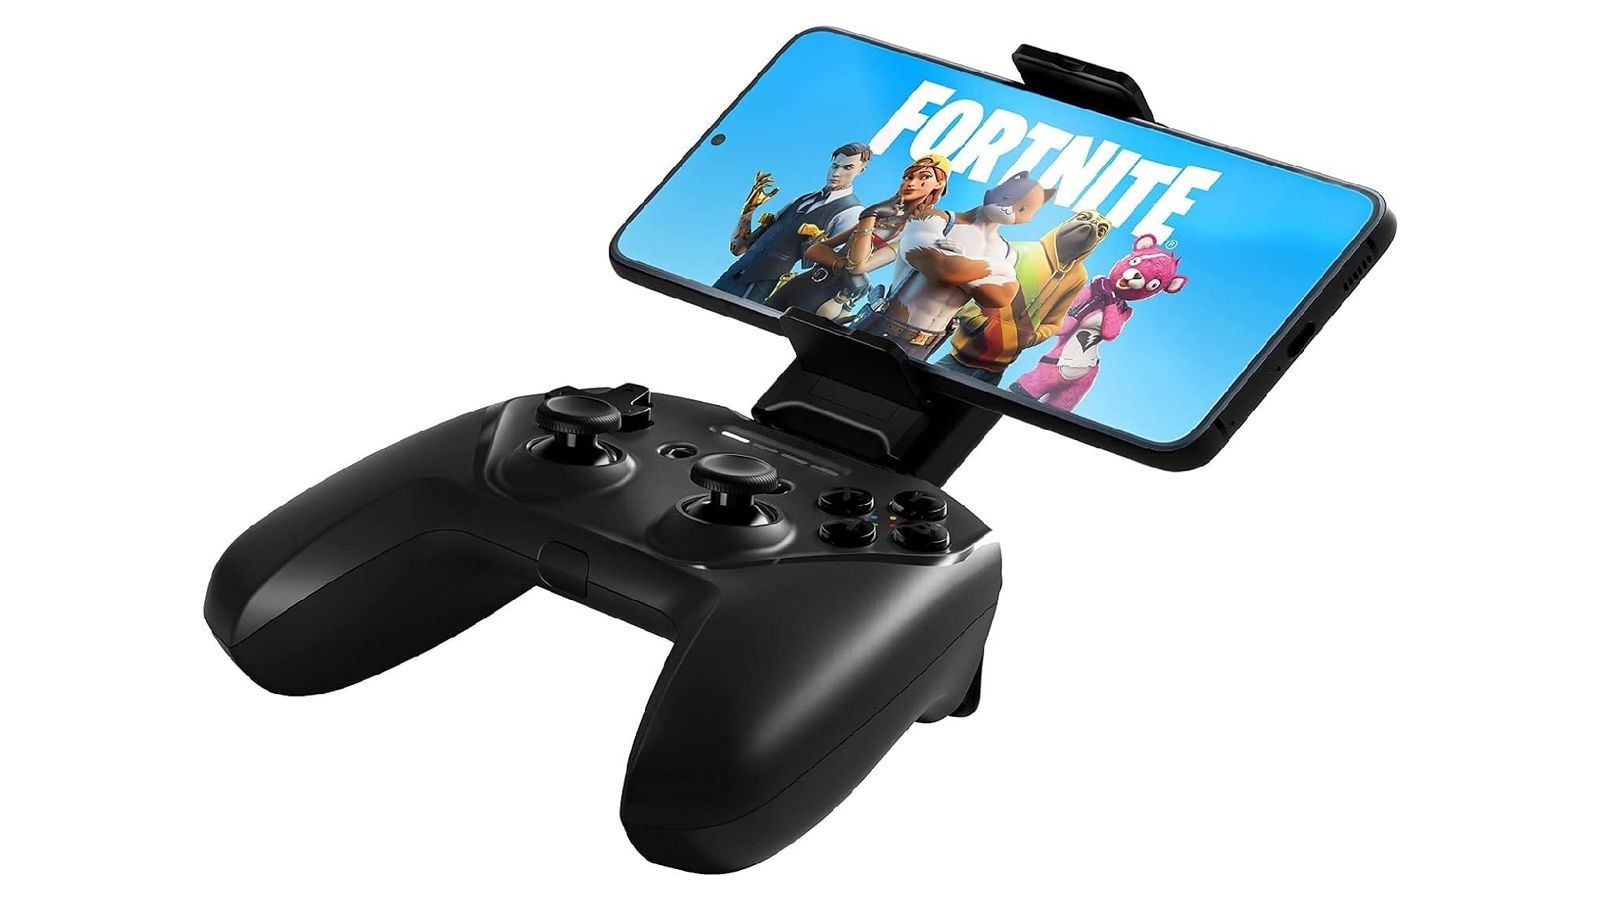 SteelSeries Stratus+ product image of a black controller connected to a phone with Fortnite mobile loaded up.